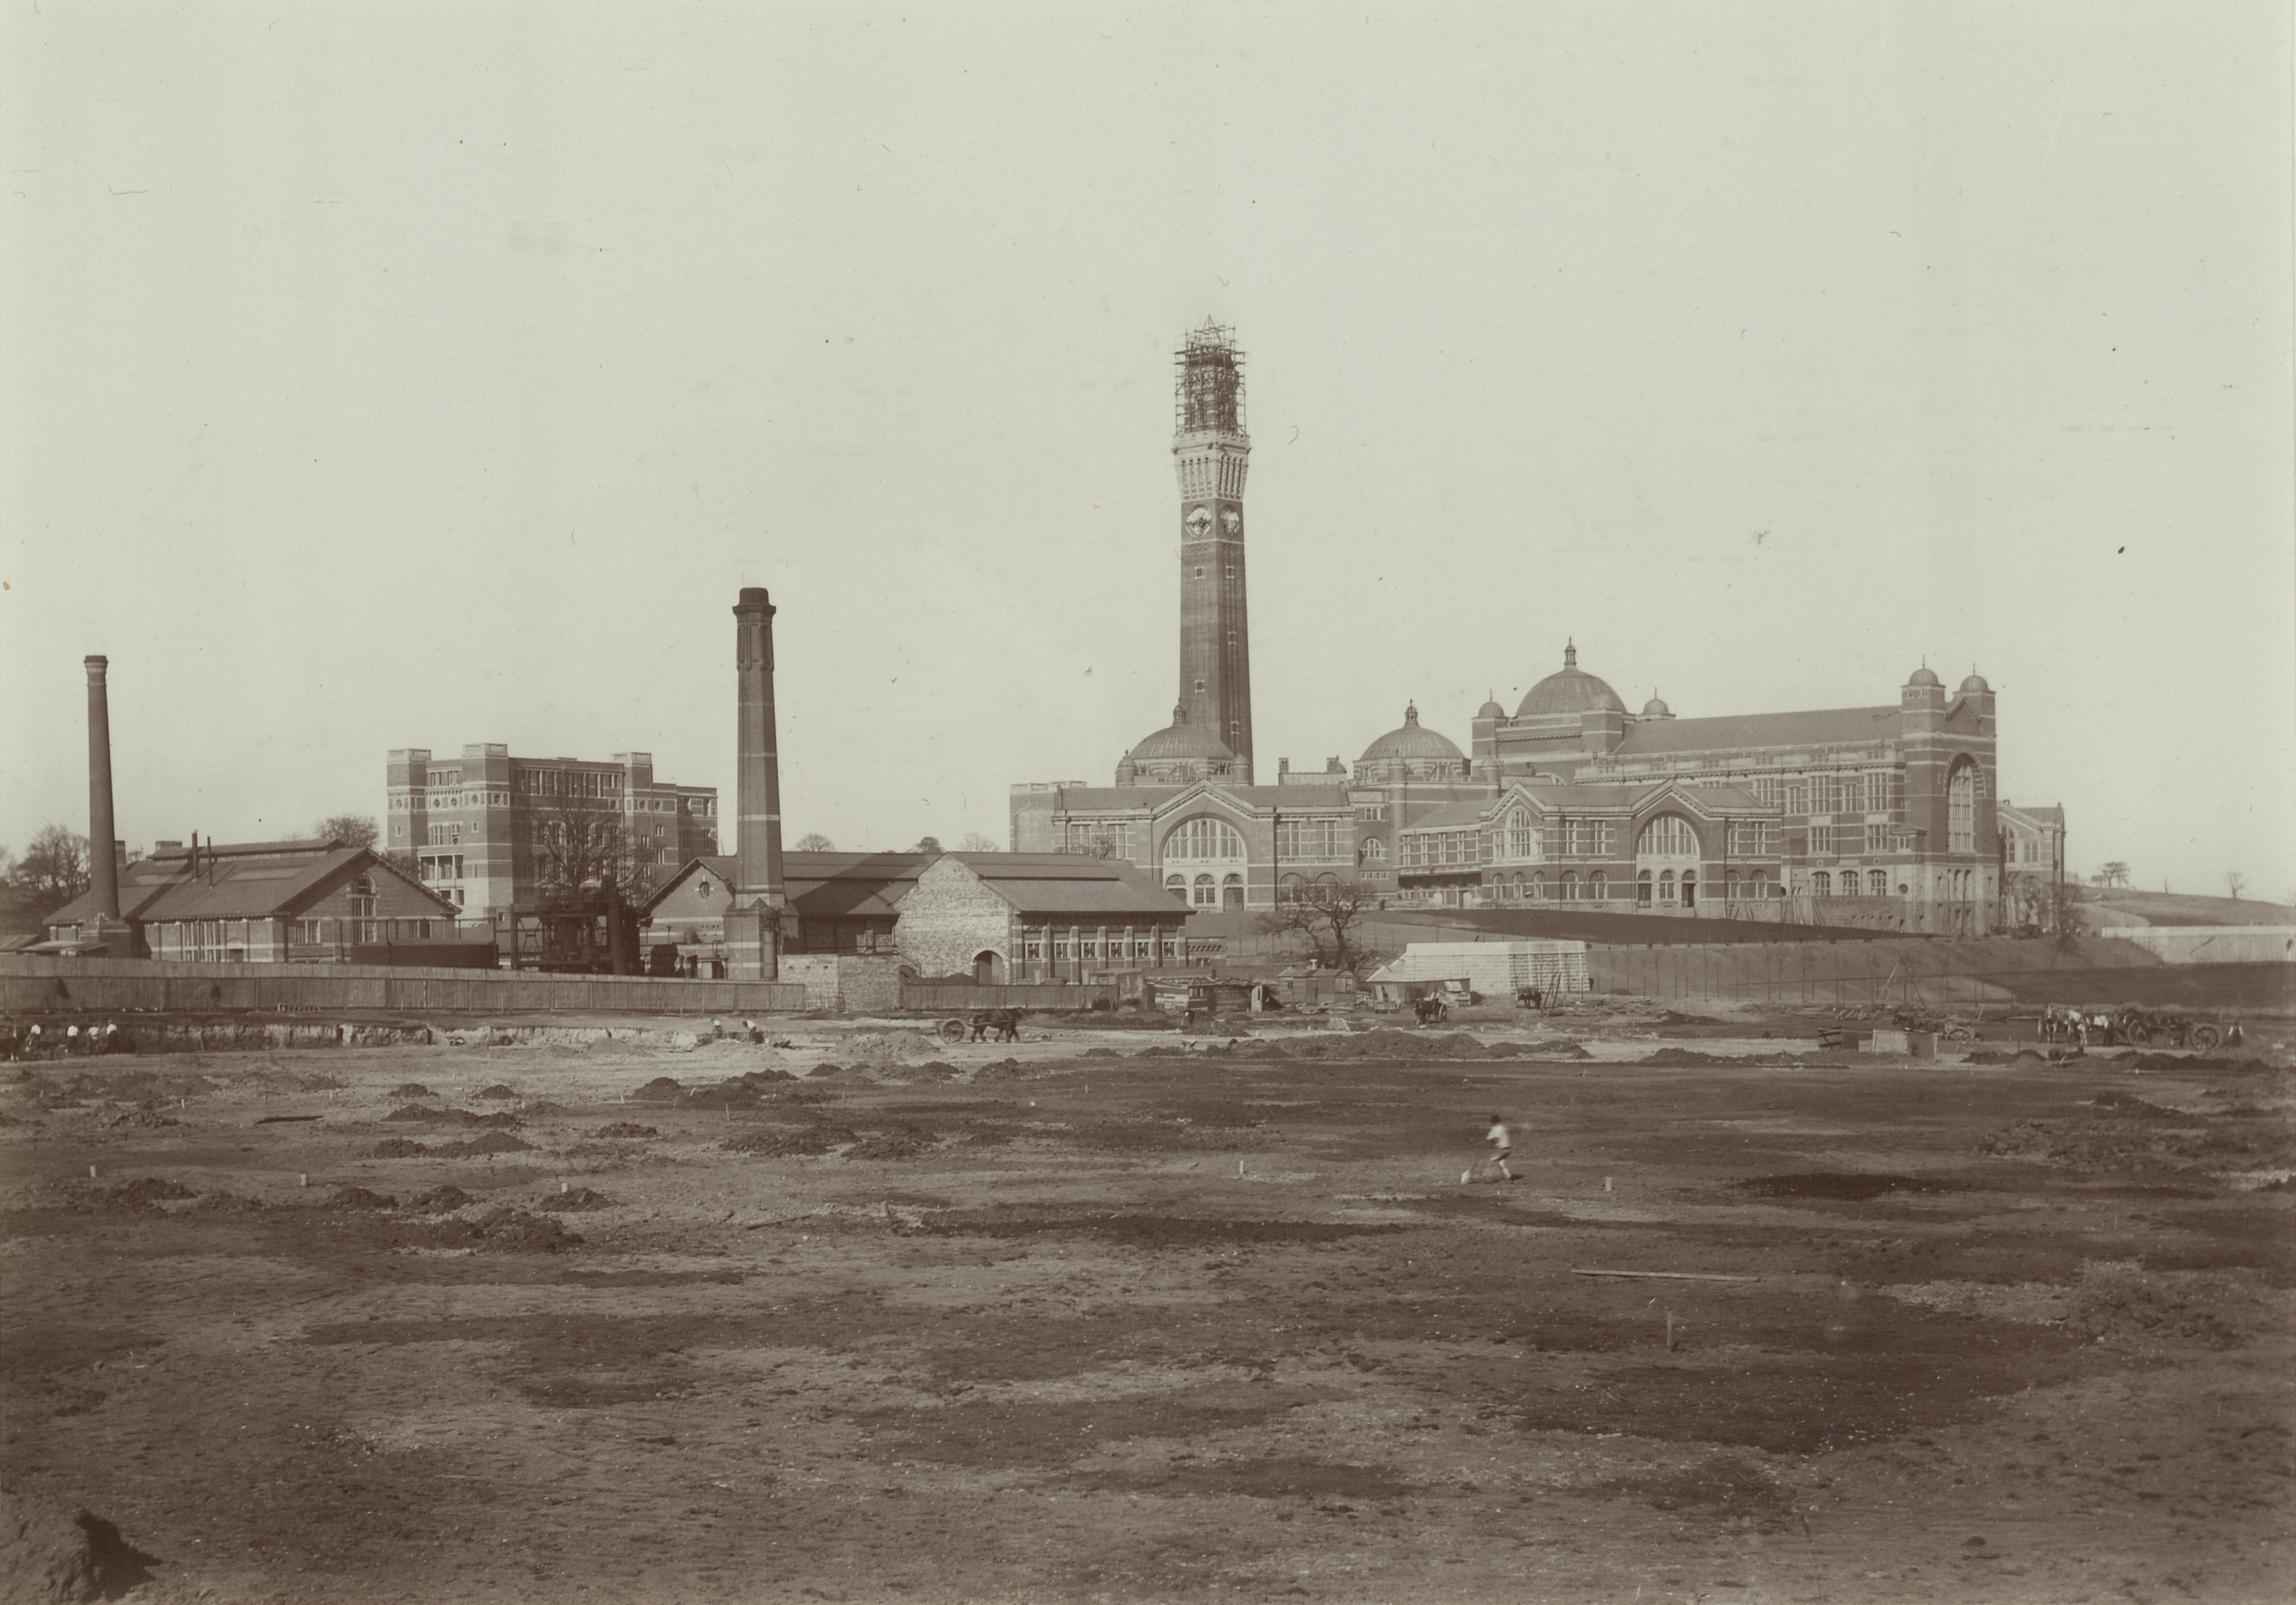 Old image of Aston Webb and Old Joe clock tower